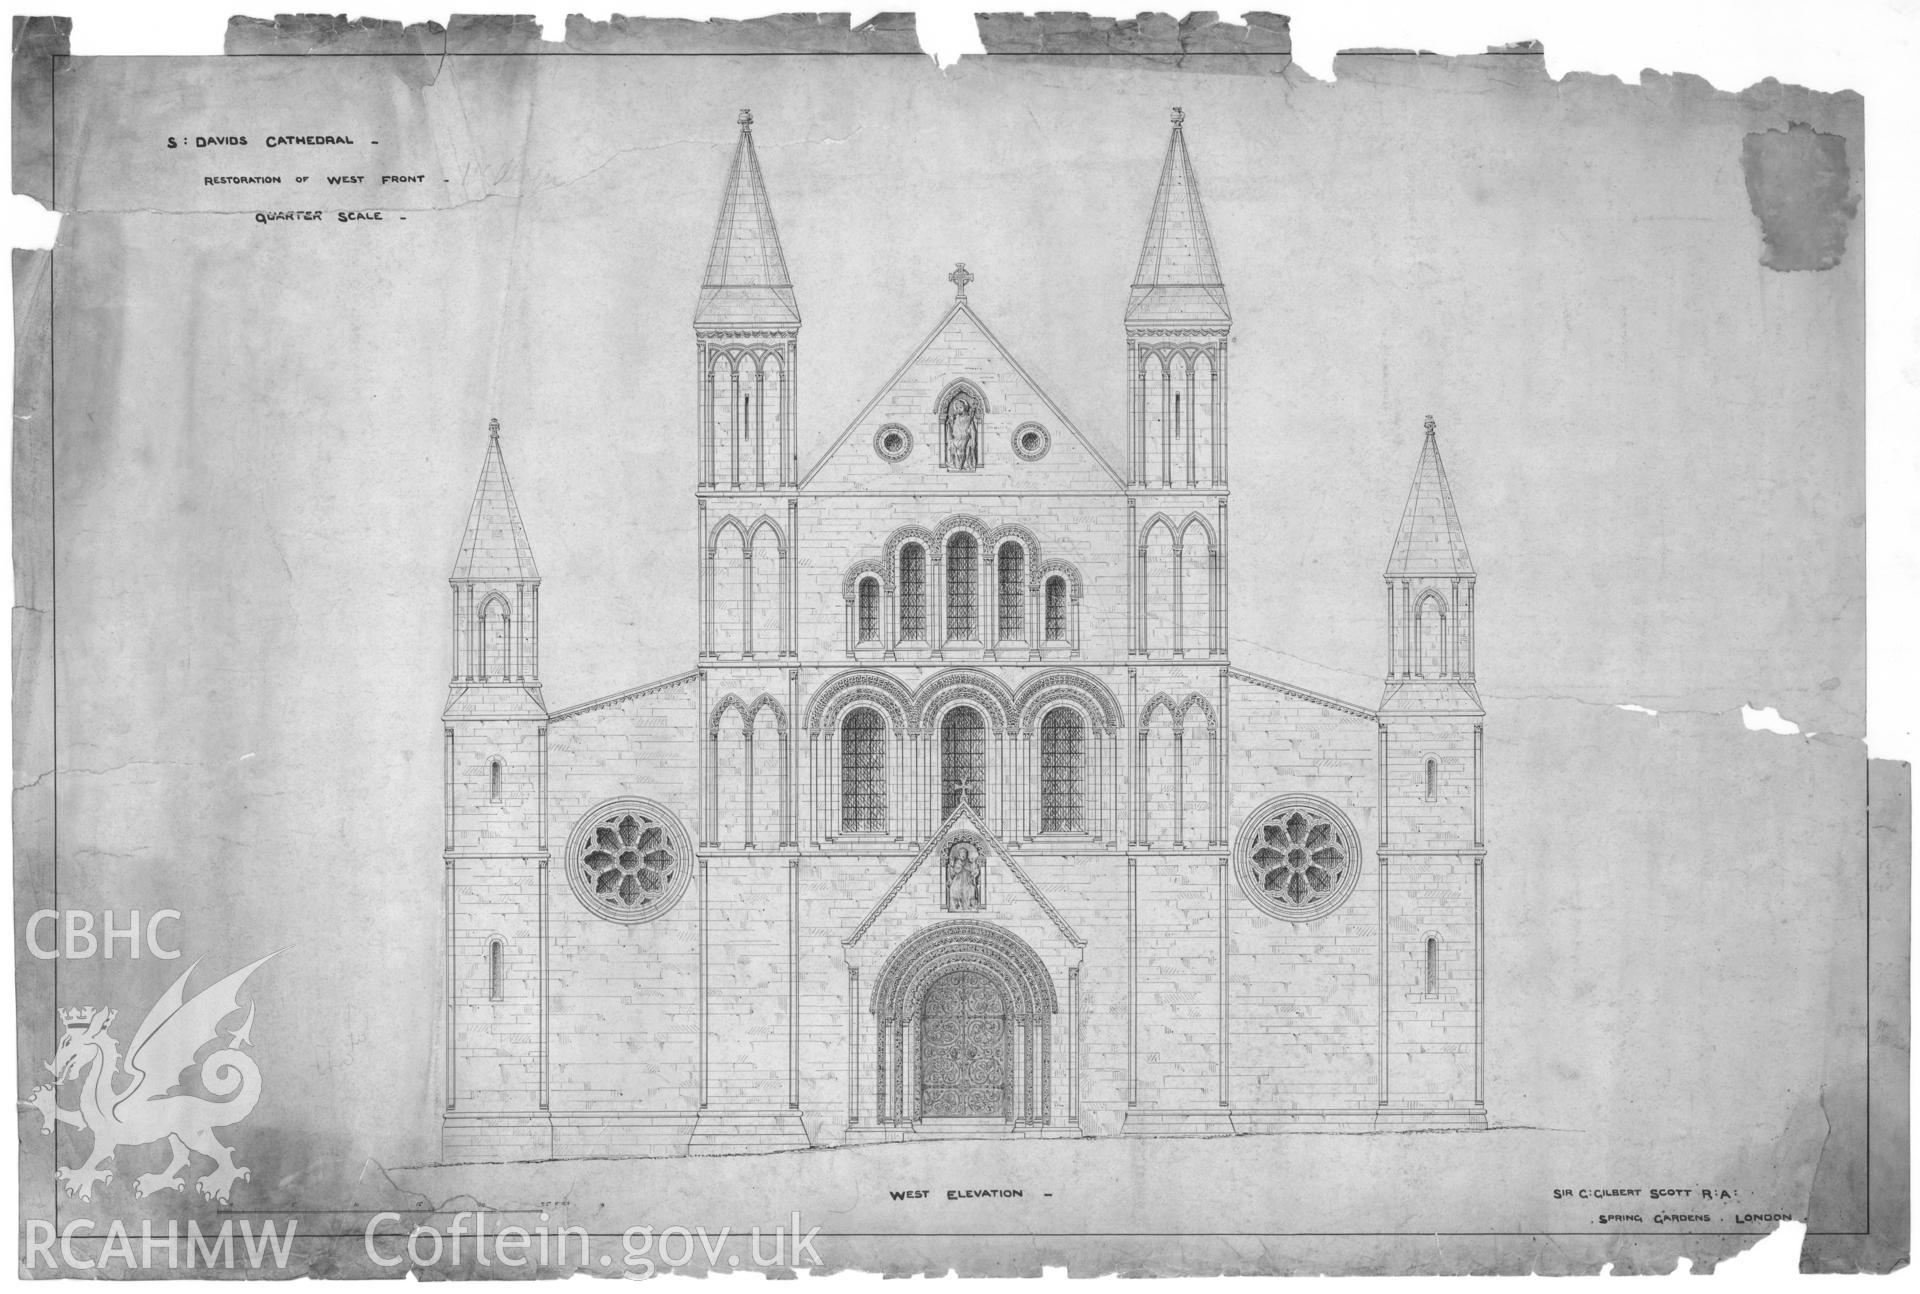 Measured drawing showing planned restoration of west front of St David's Cathedral, produced by Sir G. Gilbert Scott, undated.